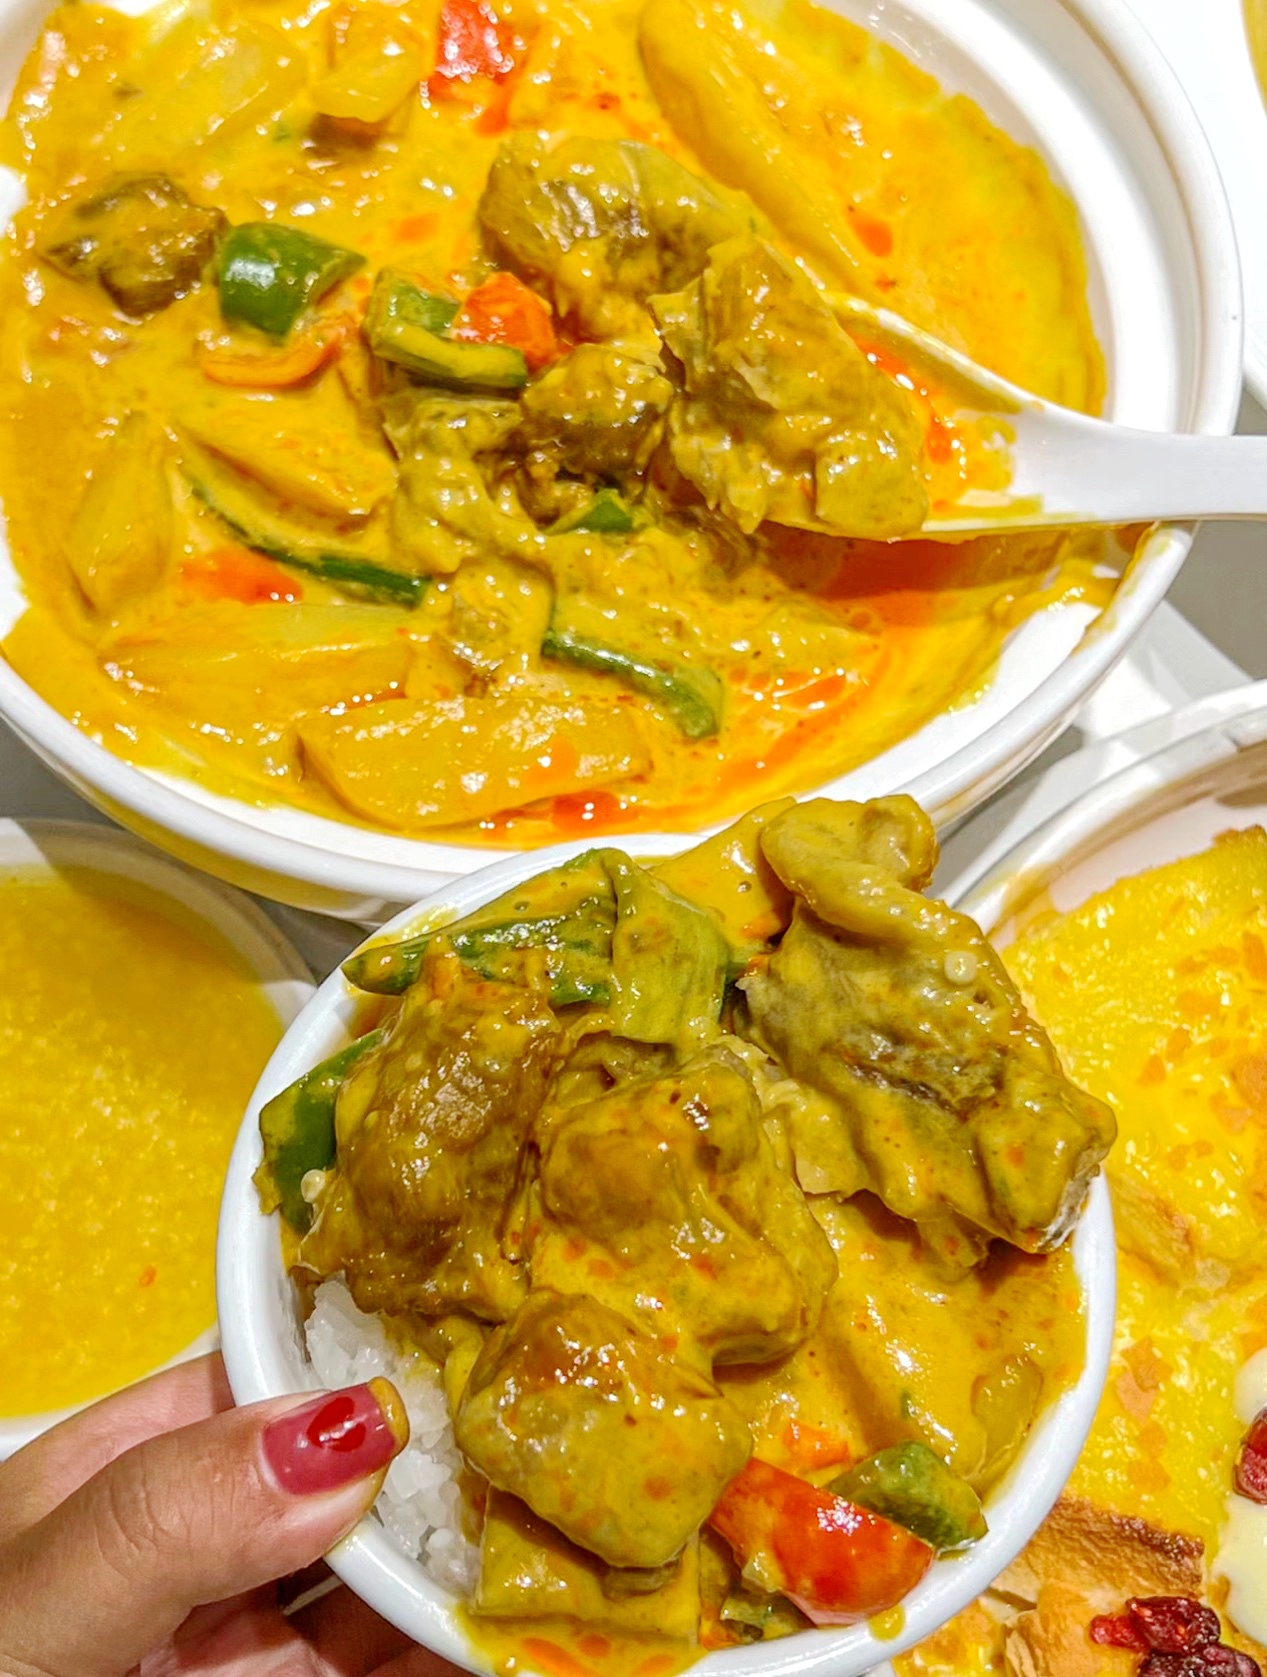 Coconut milk curry beef brisket is enjoyed by Hainan locals with a light and sweet taste. /Photo provided to CGTN